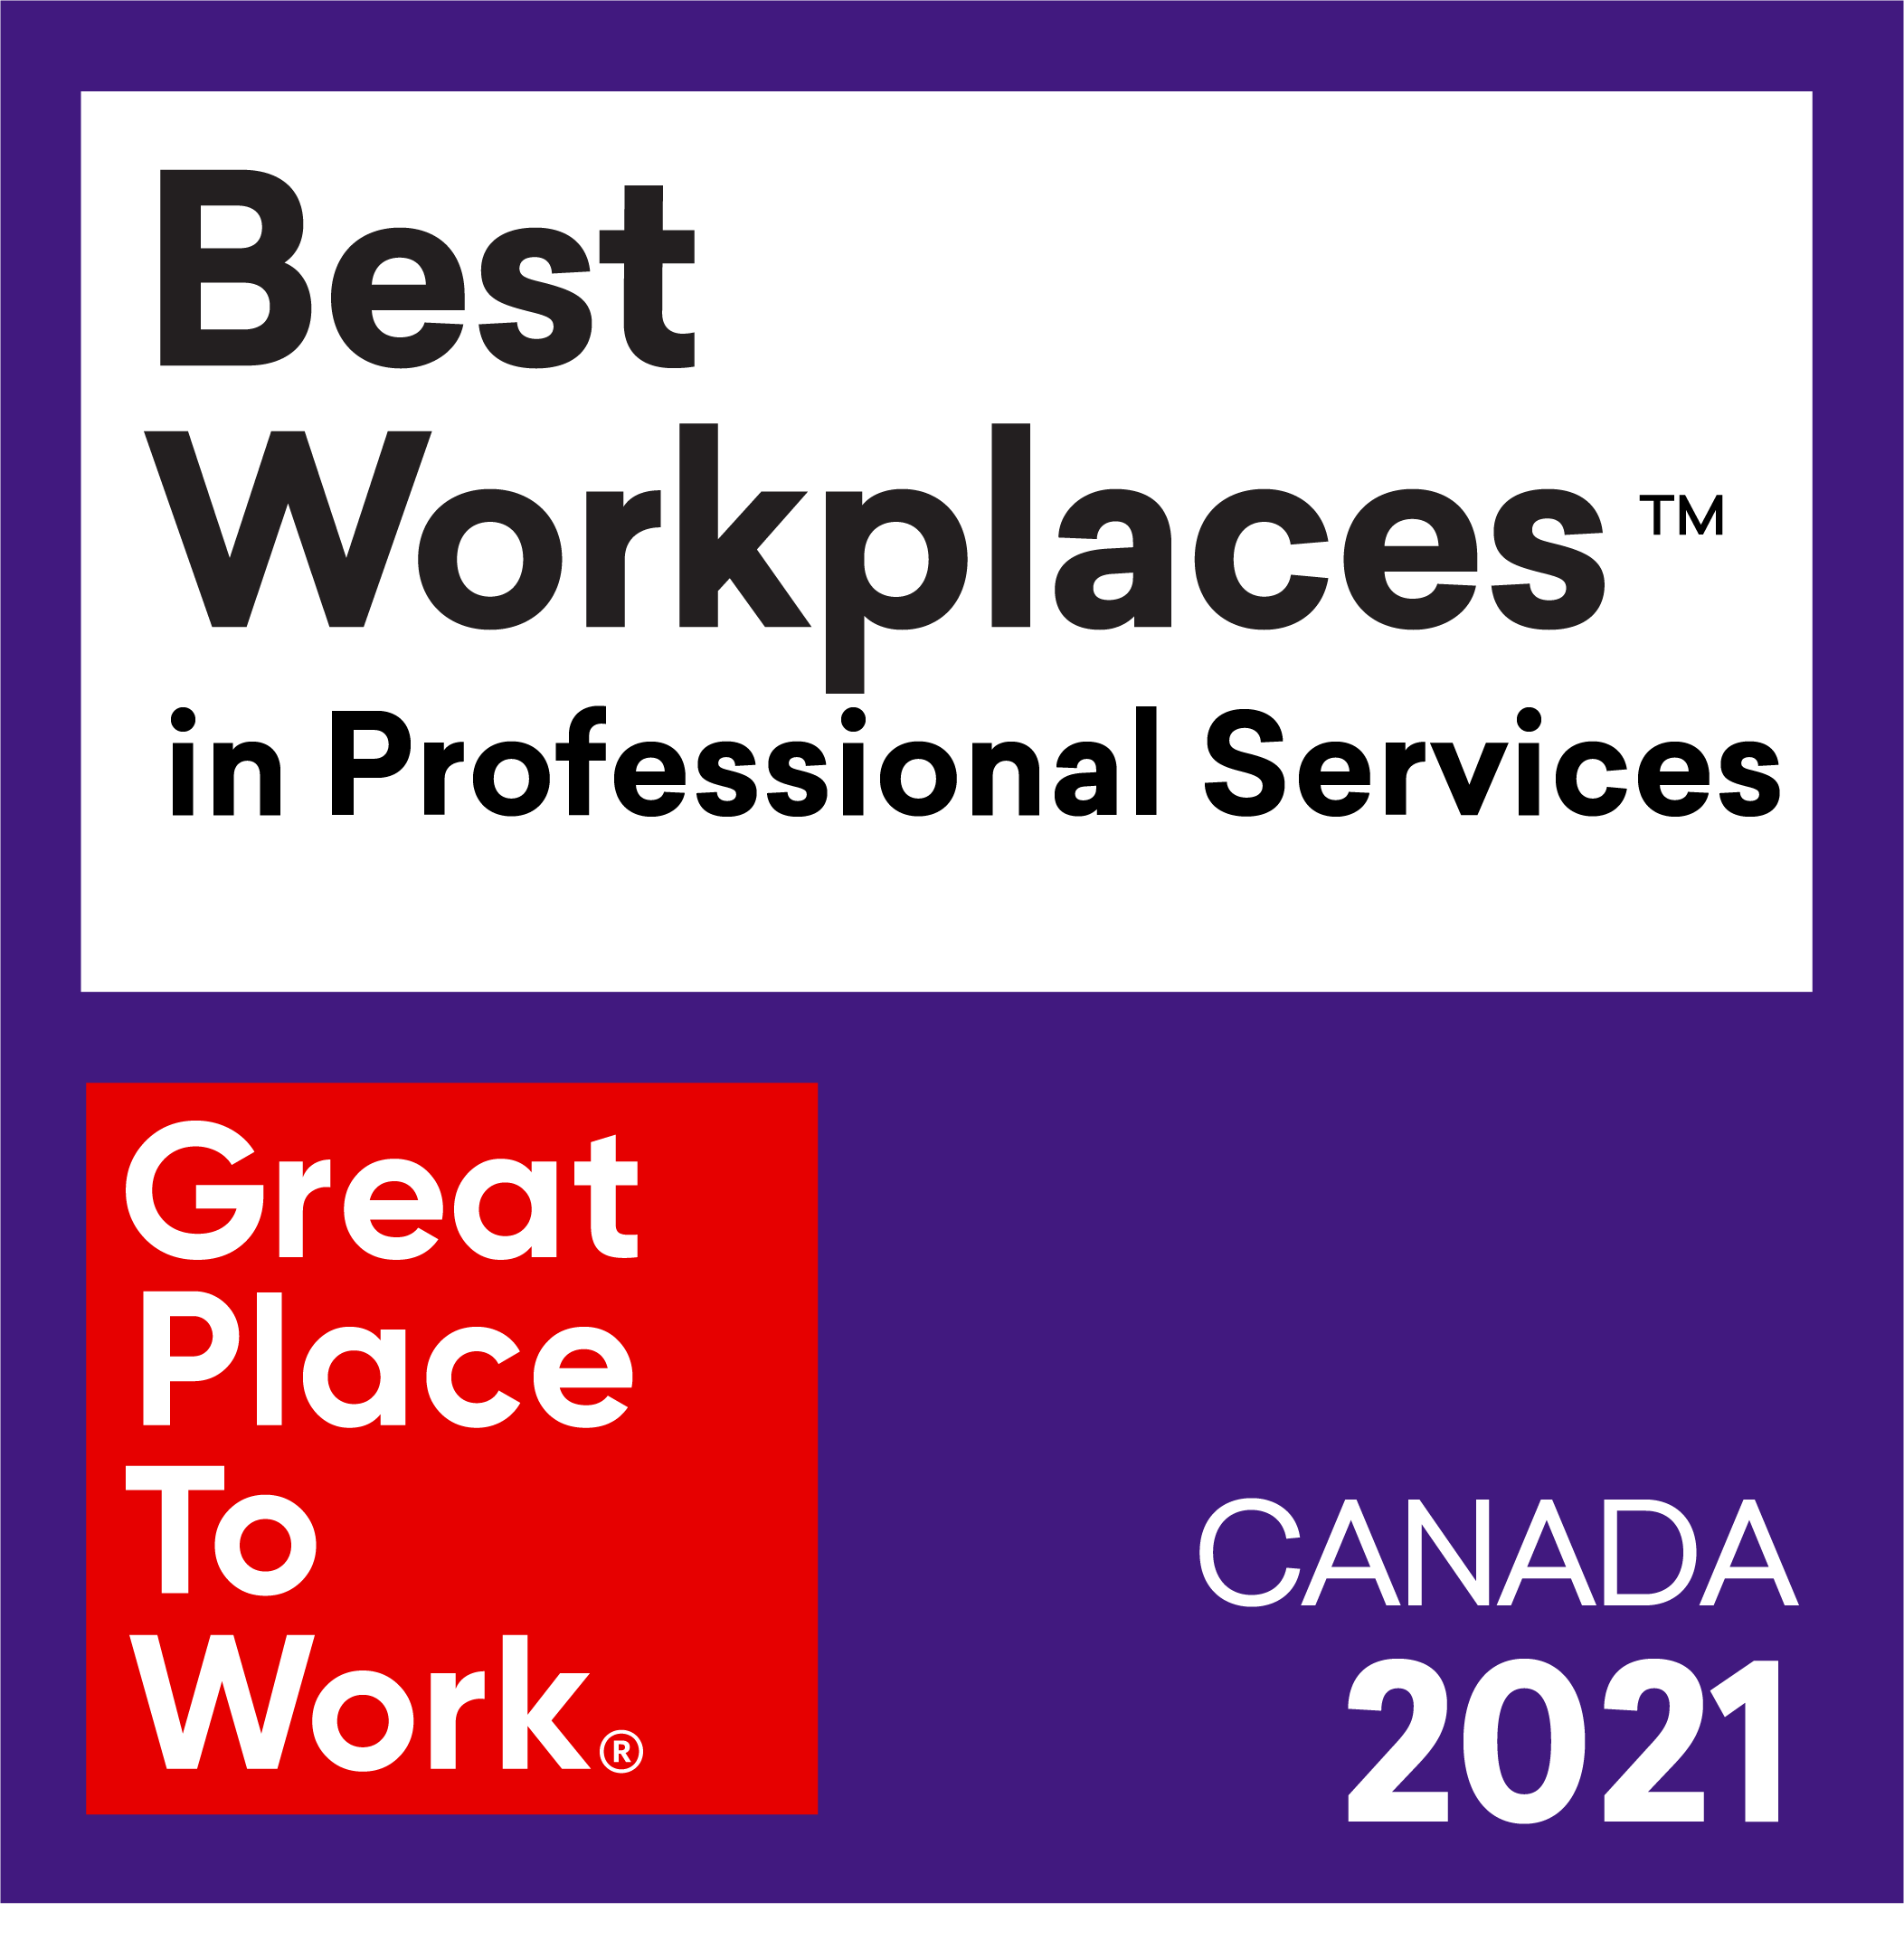 Maven consulting make it onto the 2021 List of Best Workplaces™ in Professional Services